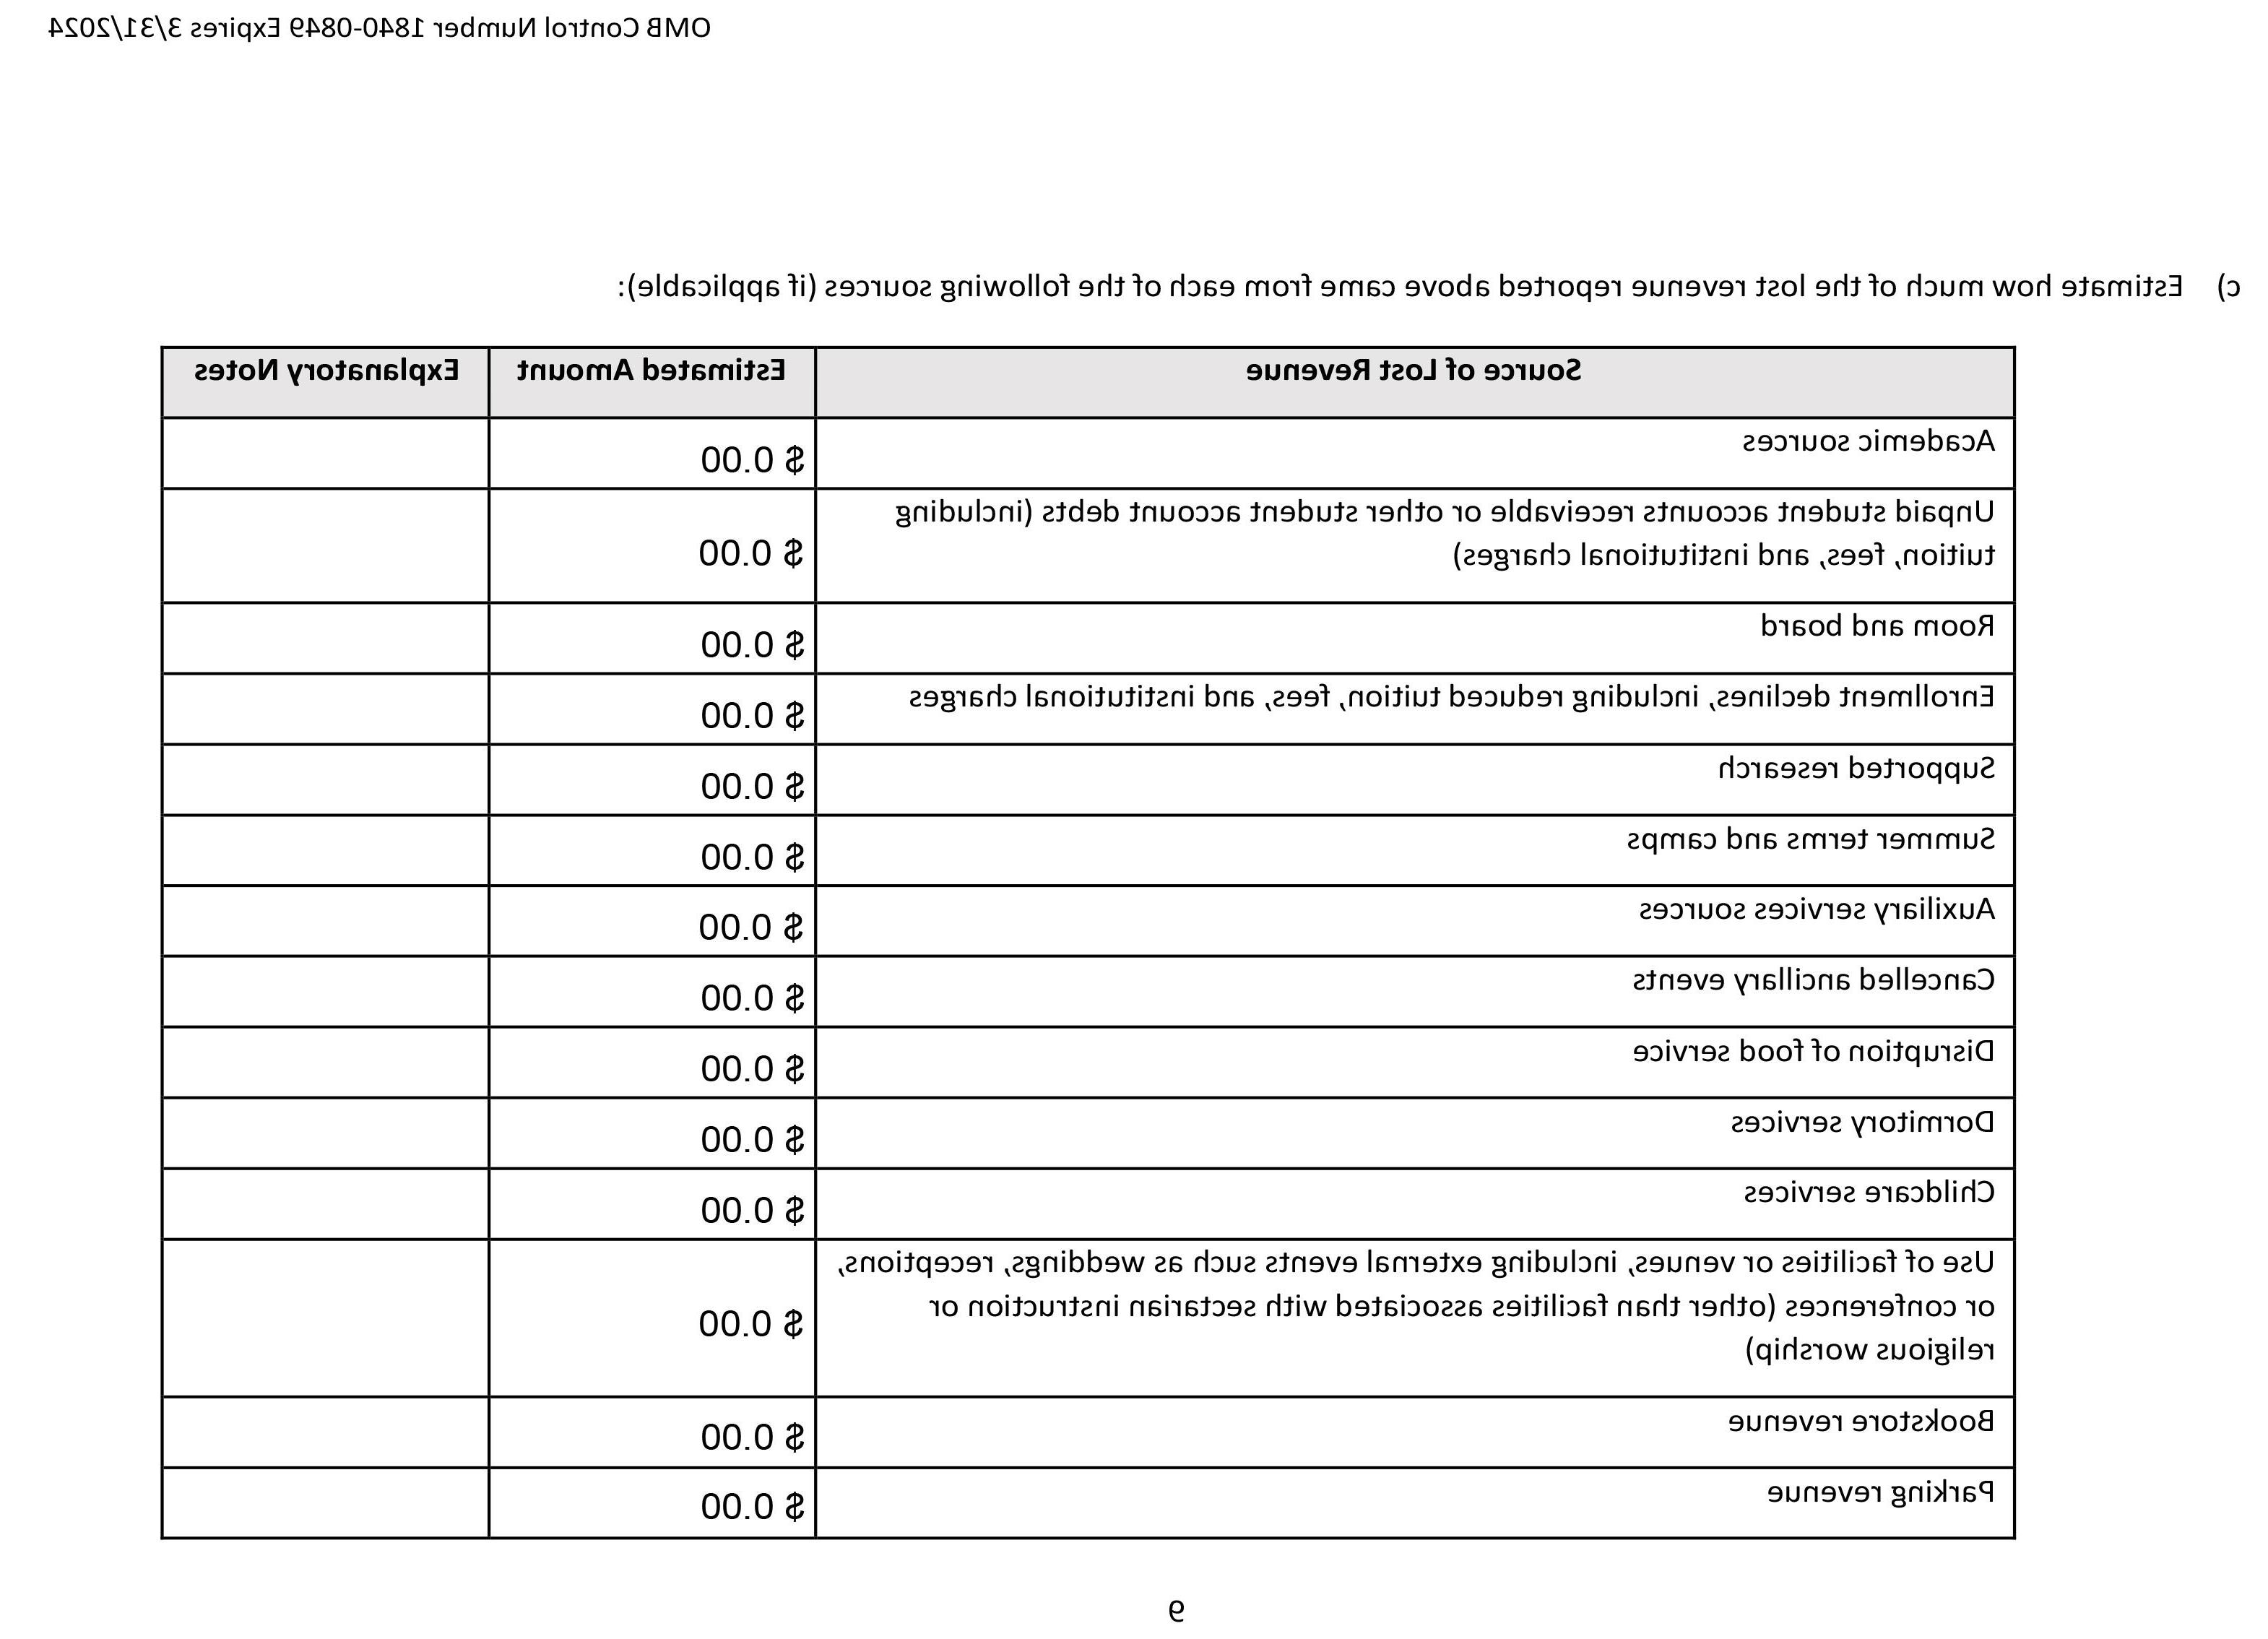 Second Quarter Expenditure Report - Page 9